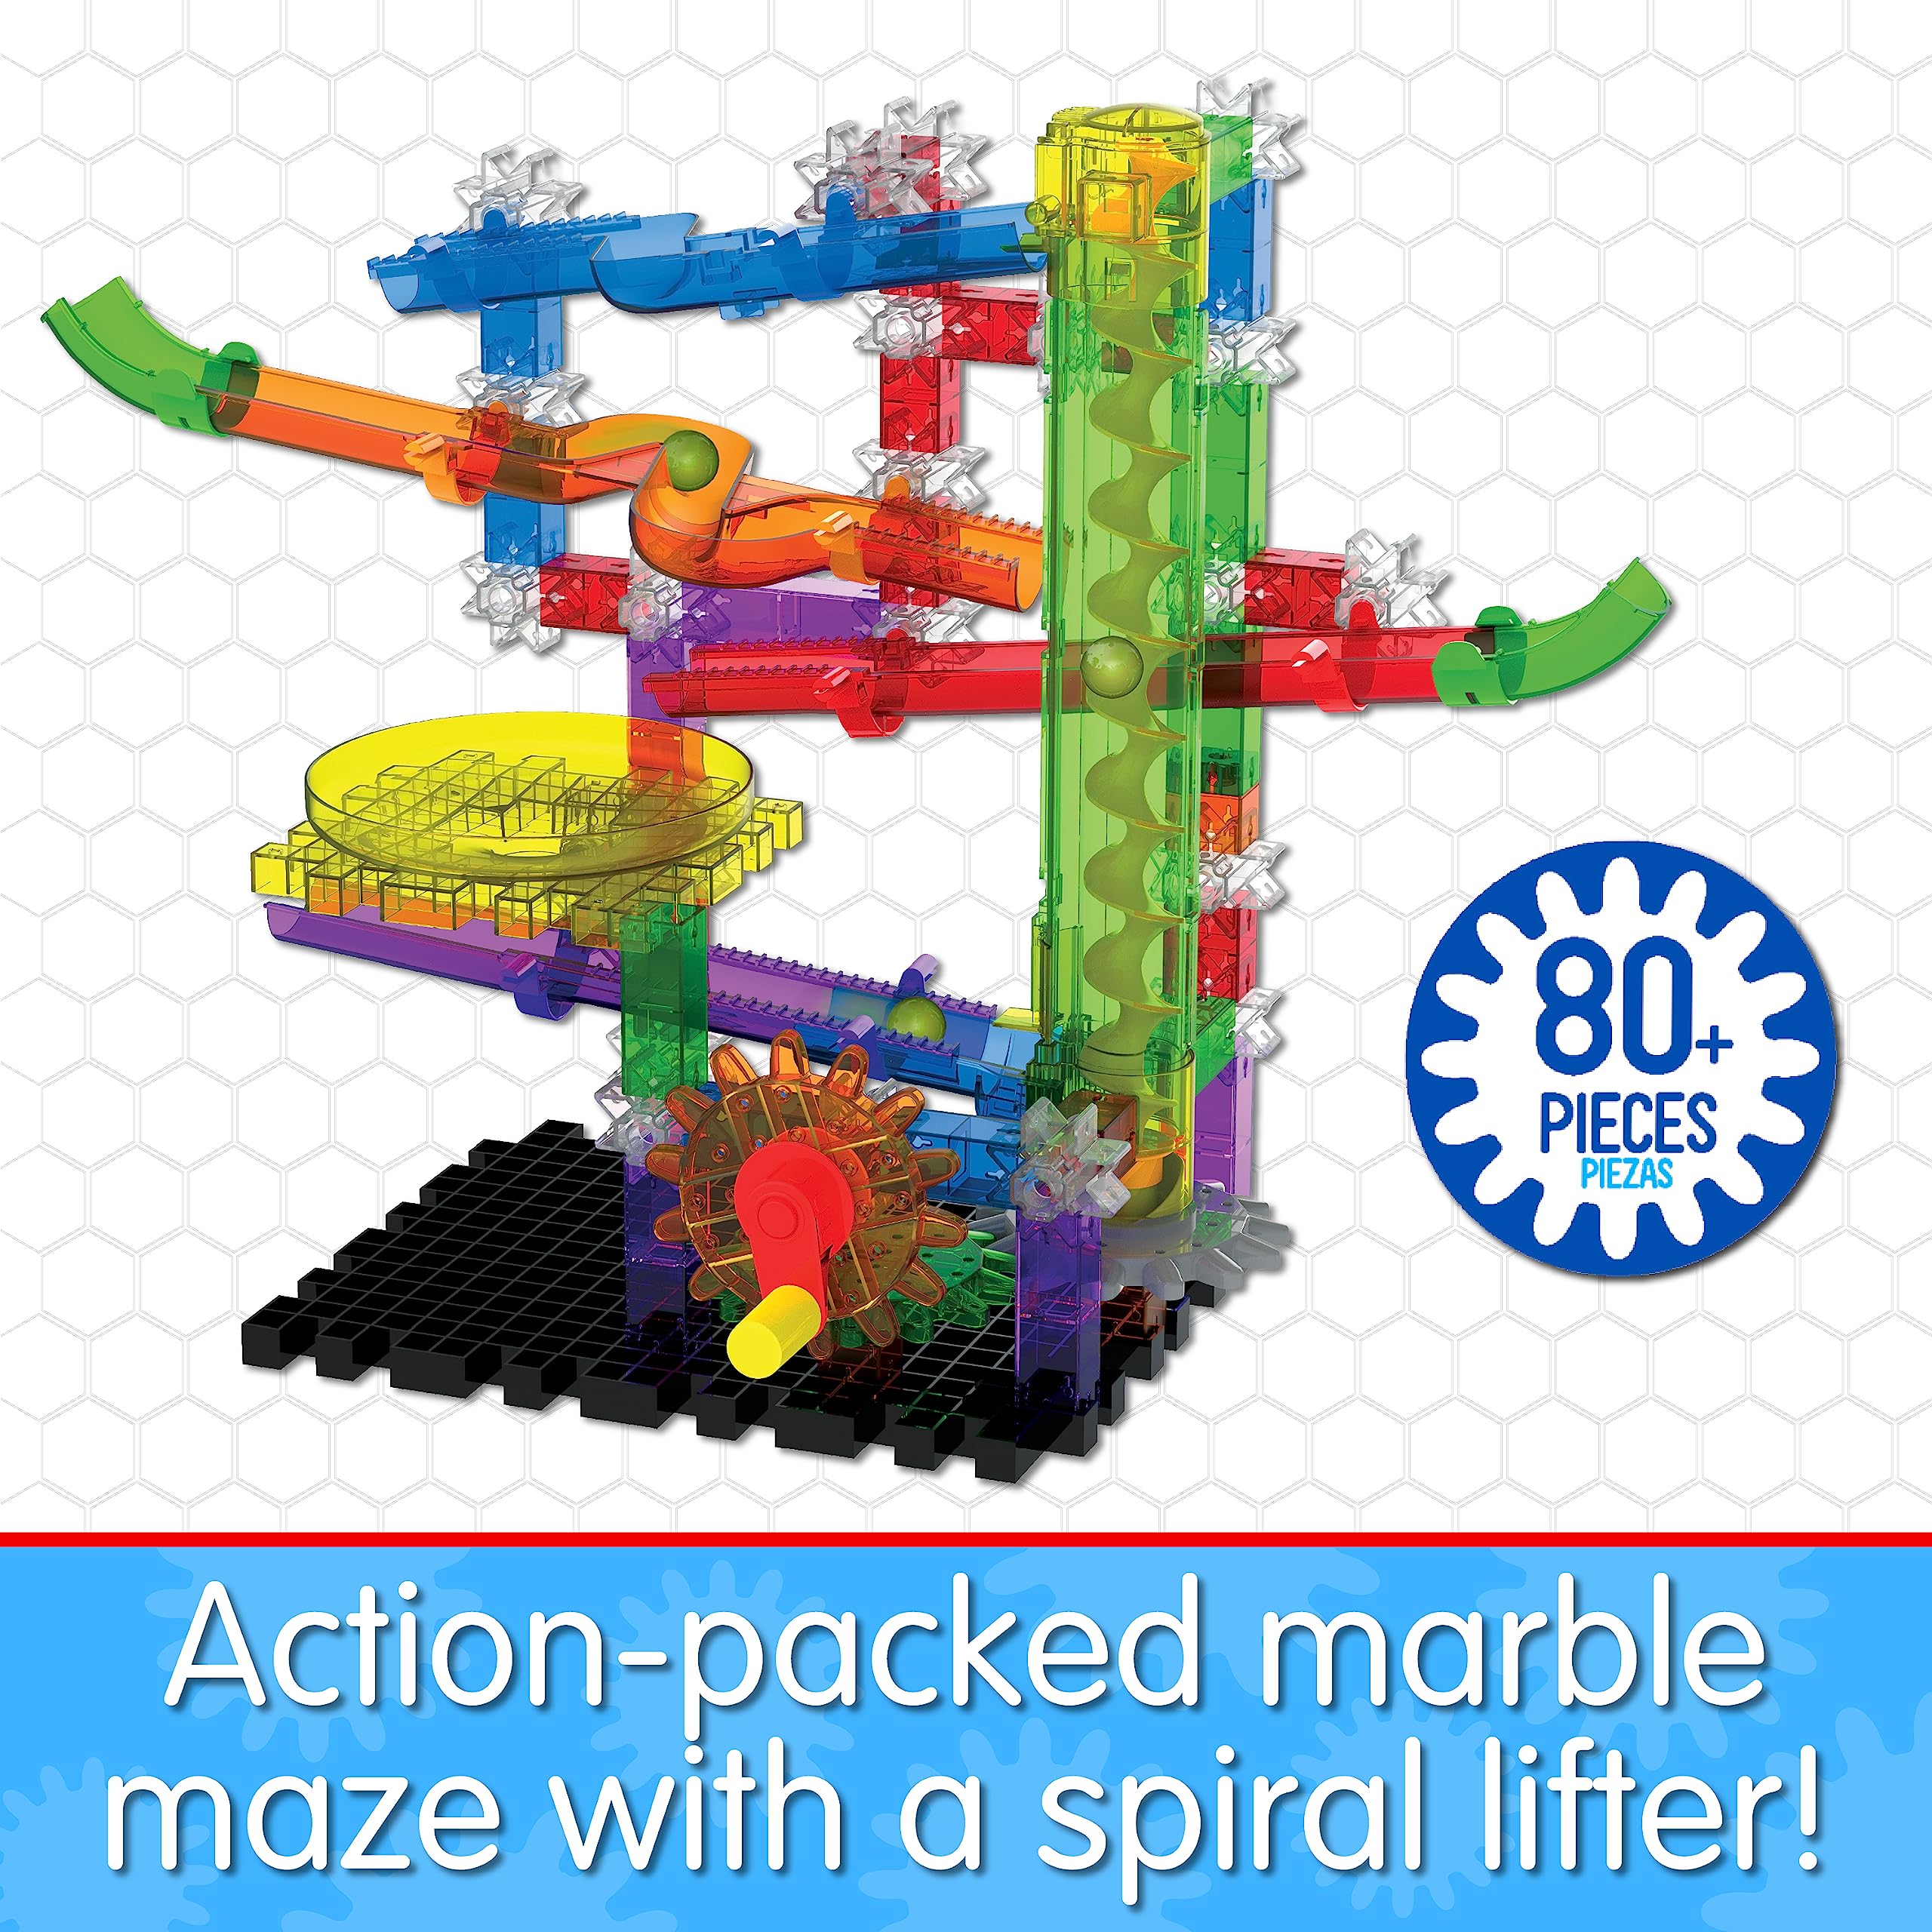 The Learning Journey: Techno Gears Marble Mania - Zoomerang 2.0 (80+ pcs) - Marble Run for Kids Ages 6 and Up - Award Winning Toys